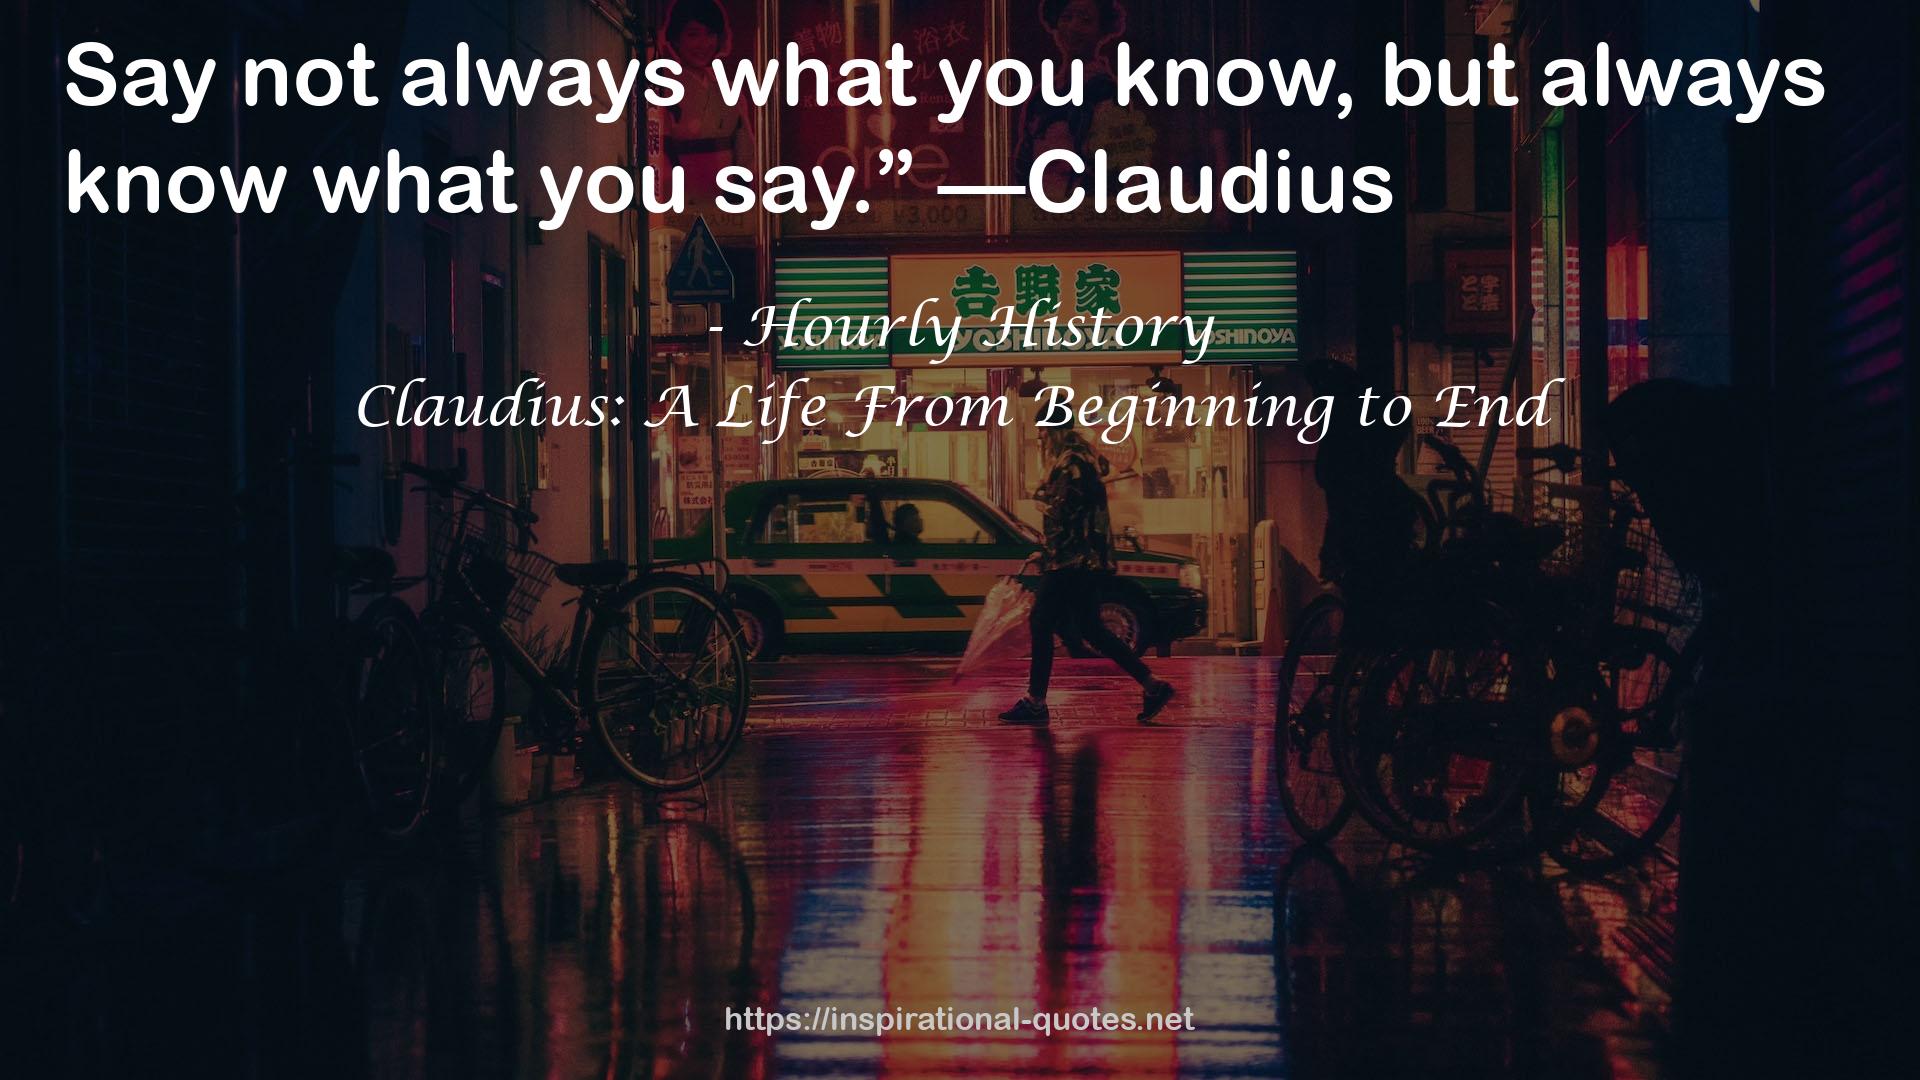 Claudius: A Life From Beginning to End QUOTES